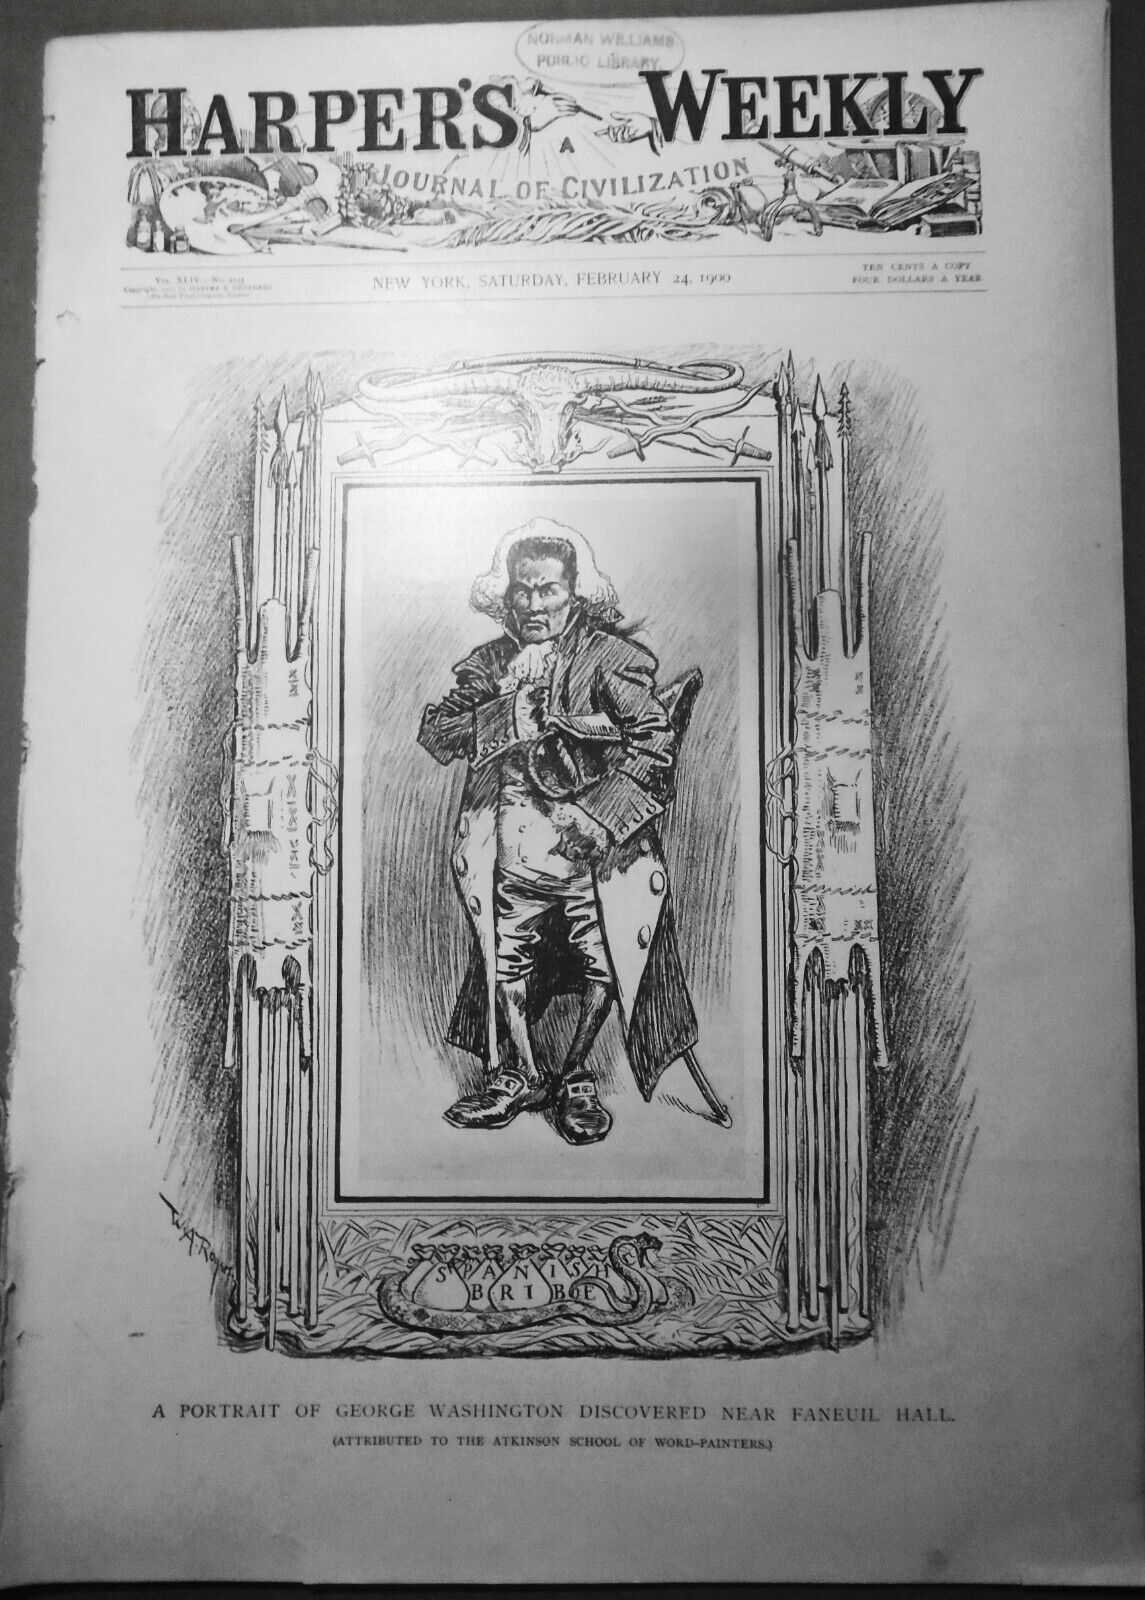 Harper's Weekly, February 4, 1900 - War in South Africa; General Lawton, etc